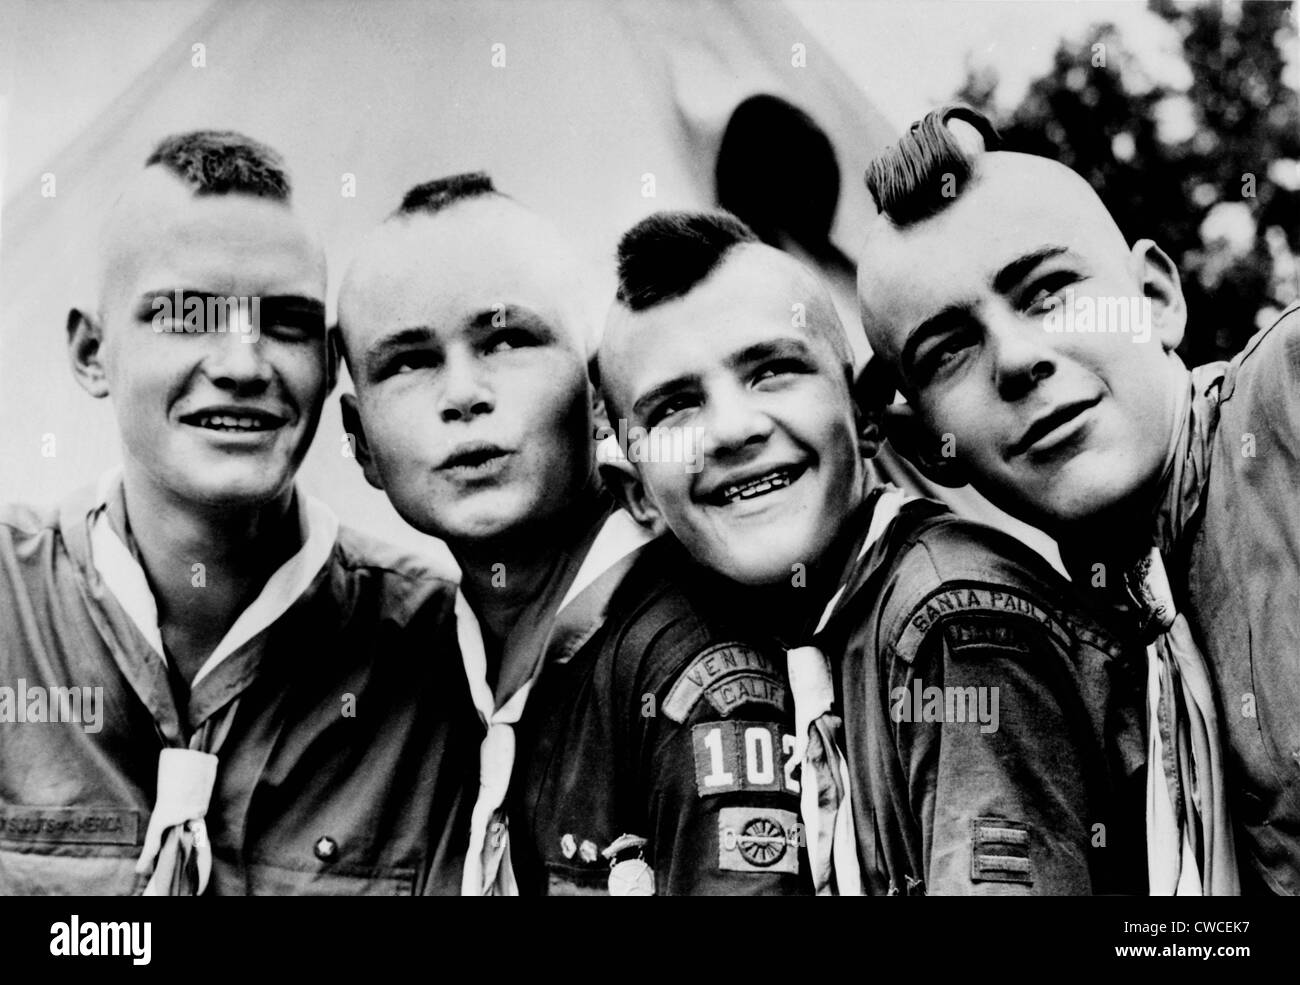 California Boy Scouts with Mohawk haircuts. They were attending a Boy Scout jamboree at Valley Forge, Pennsylvania. 1950. Stock Photo